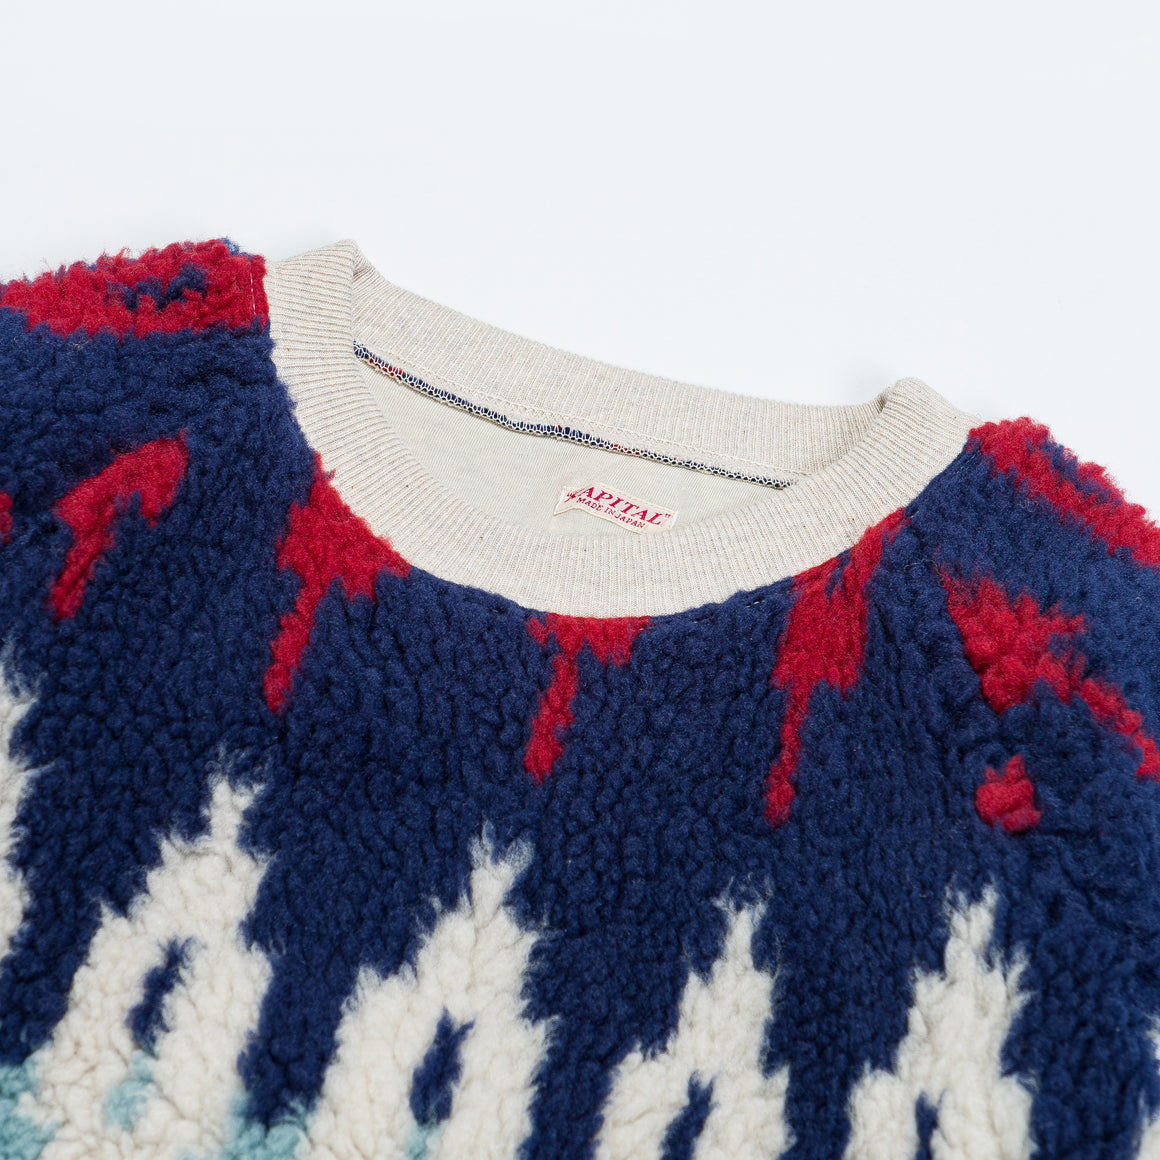 Kapital - TOP Fleece Knit x BOA Fleece NORDIC SWT - Navy/Red - UP THERE